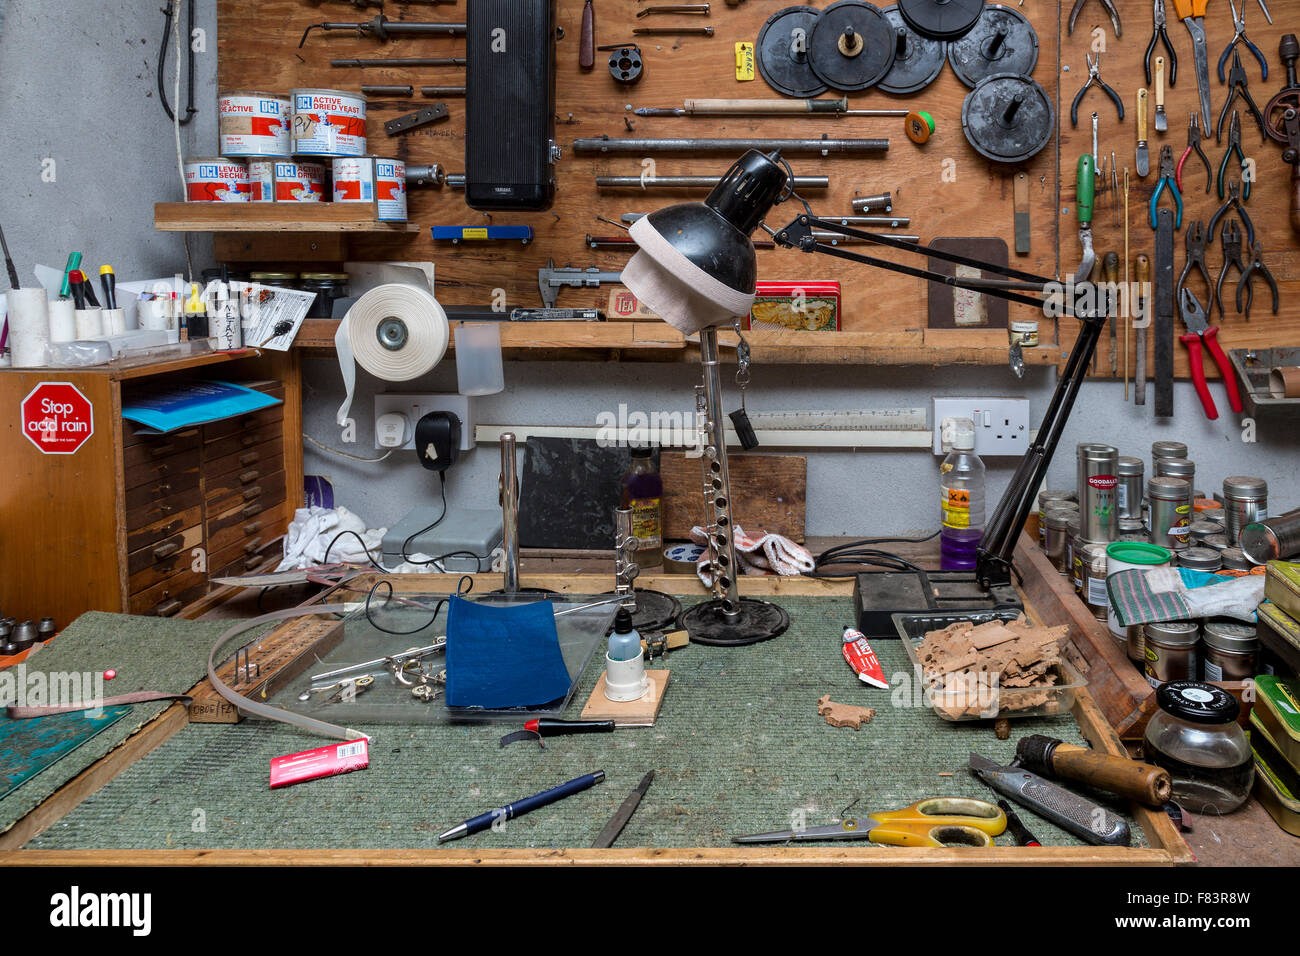 Workbench and tools for musical instrument repair. Stock Photo